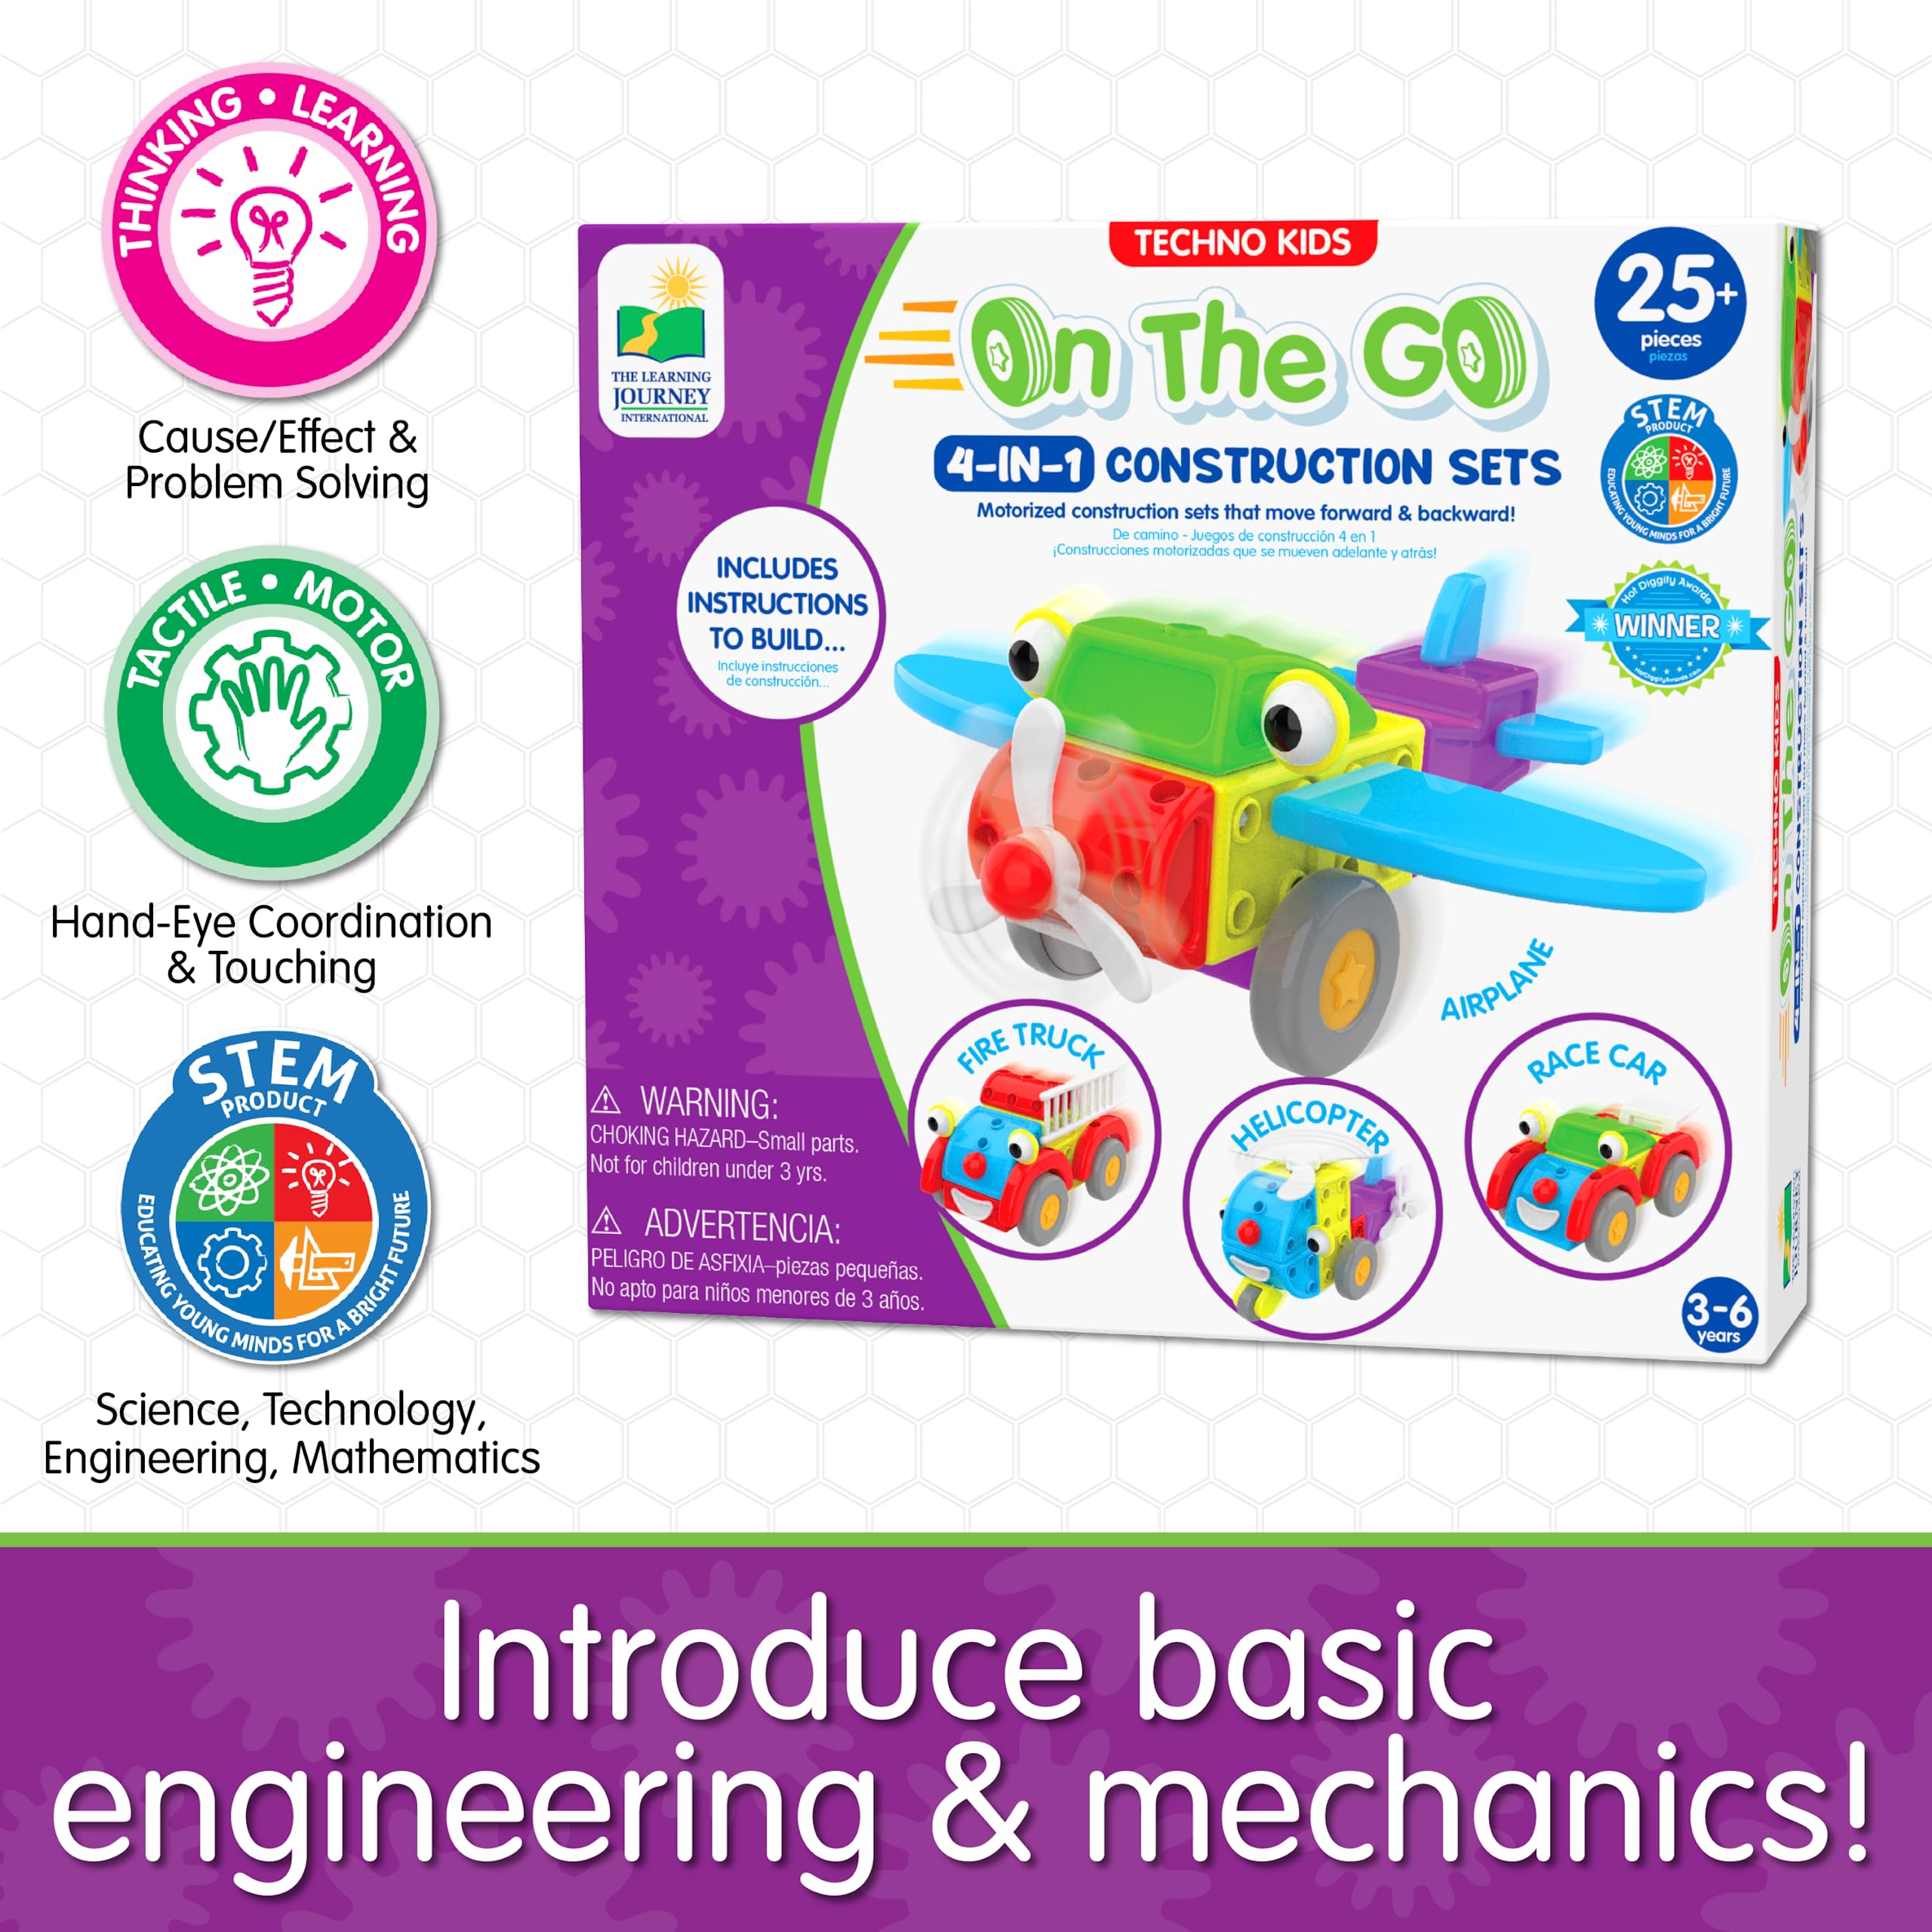 The Learning Journey: Techno Kids 4-in-1 On The Go - STEM Construction Set - Toy Interlocking Gear Sets for Children Ages 3 Years and Up - Award Winning Toys